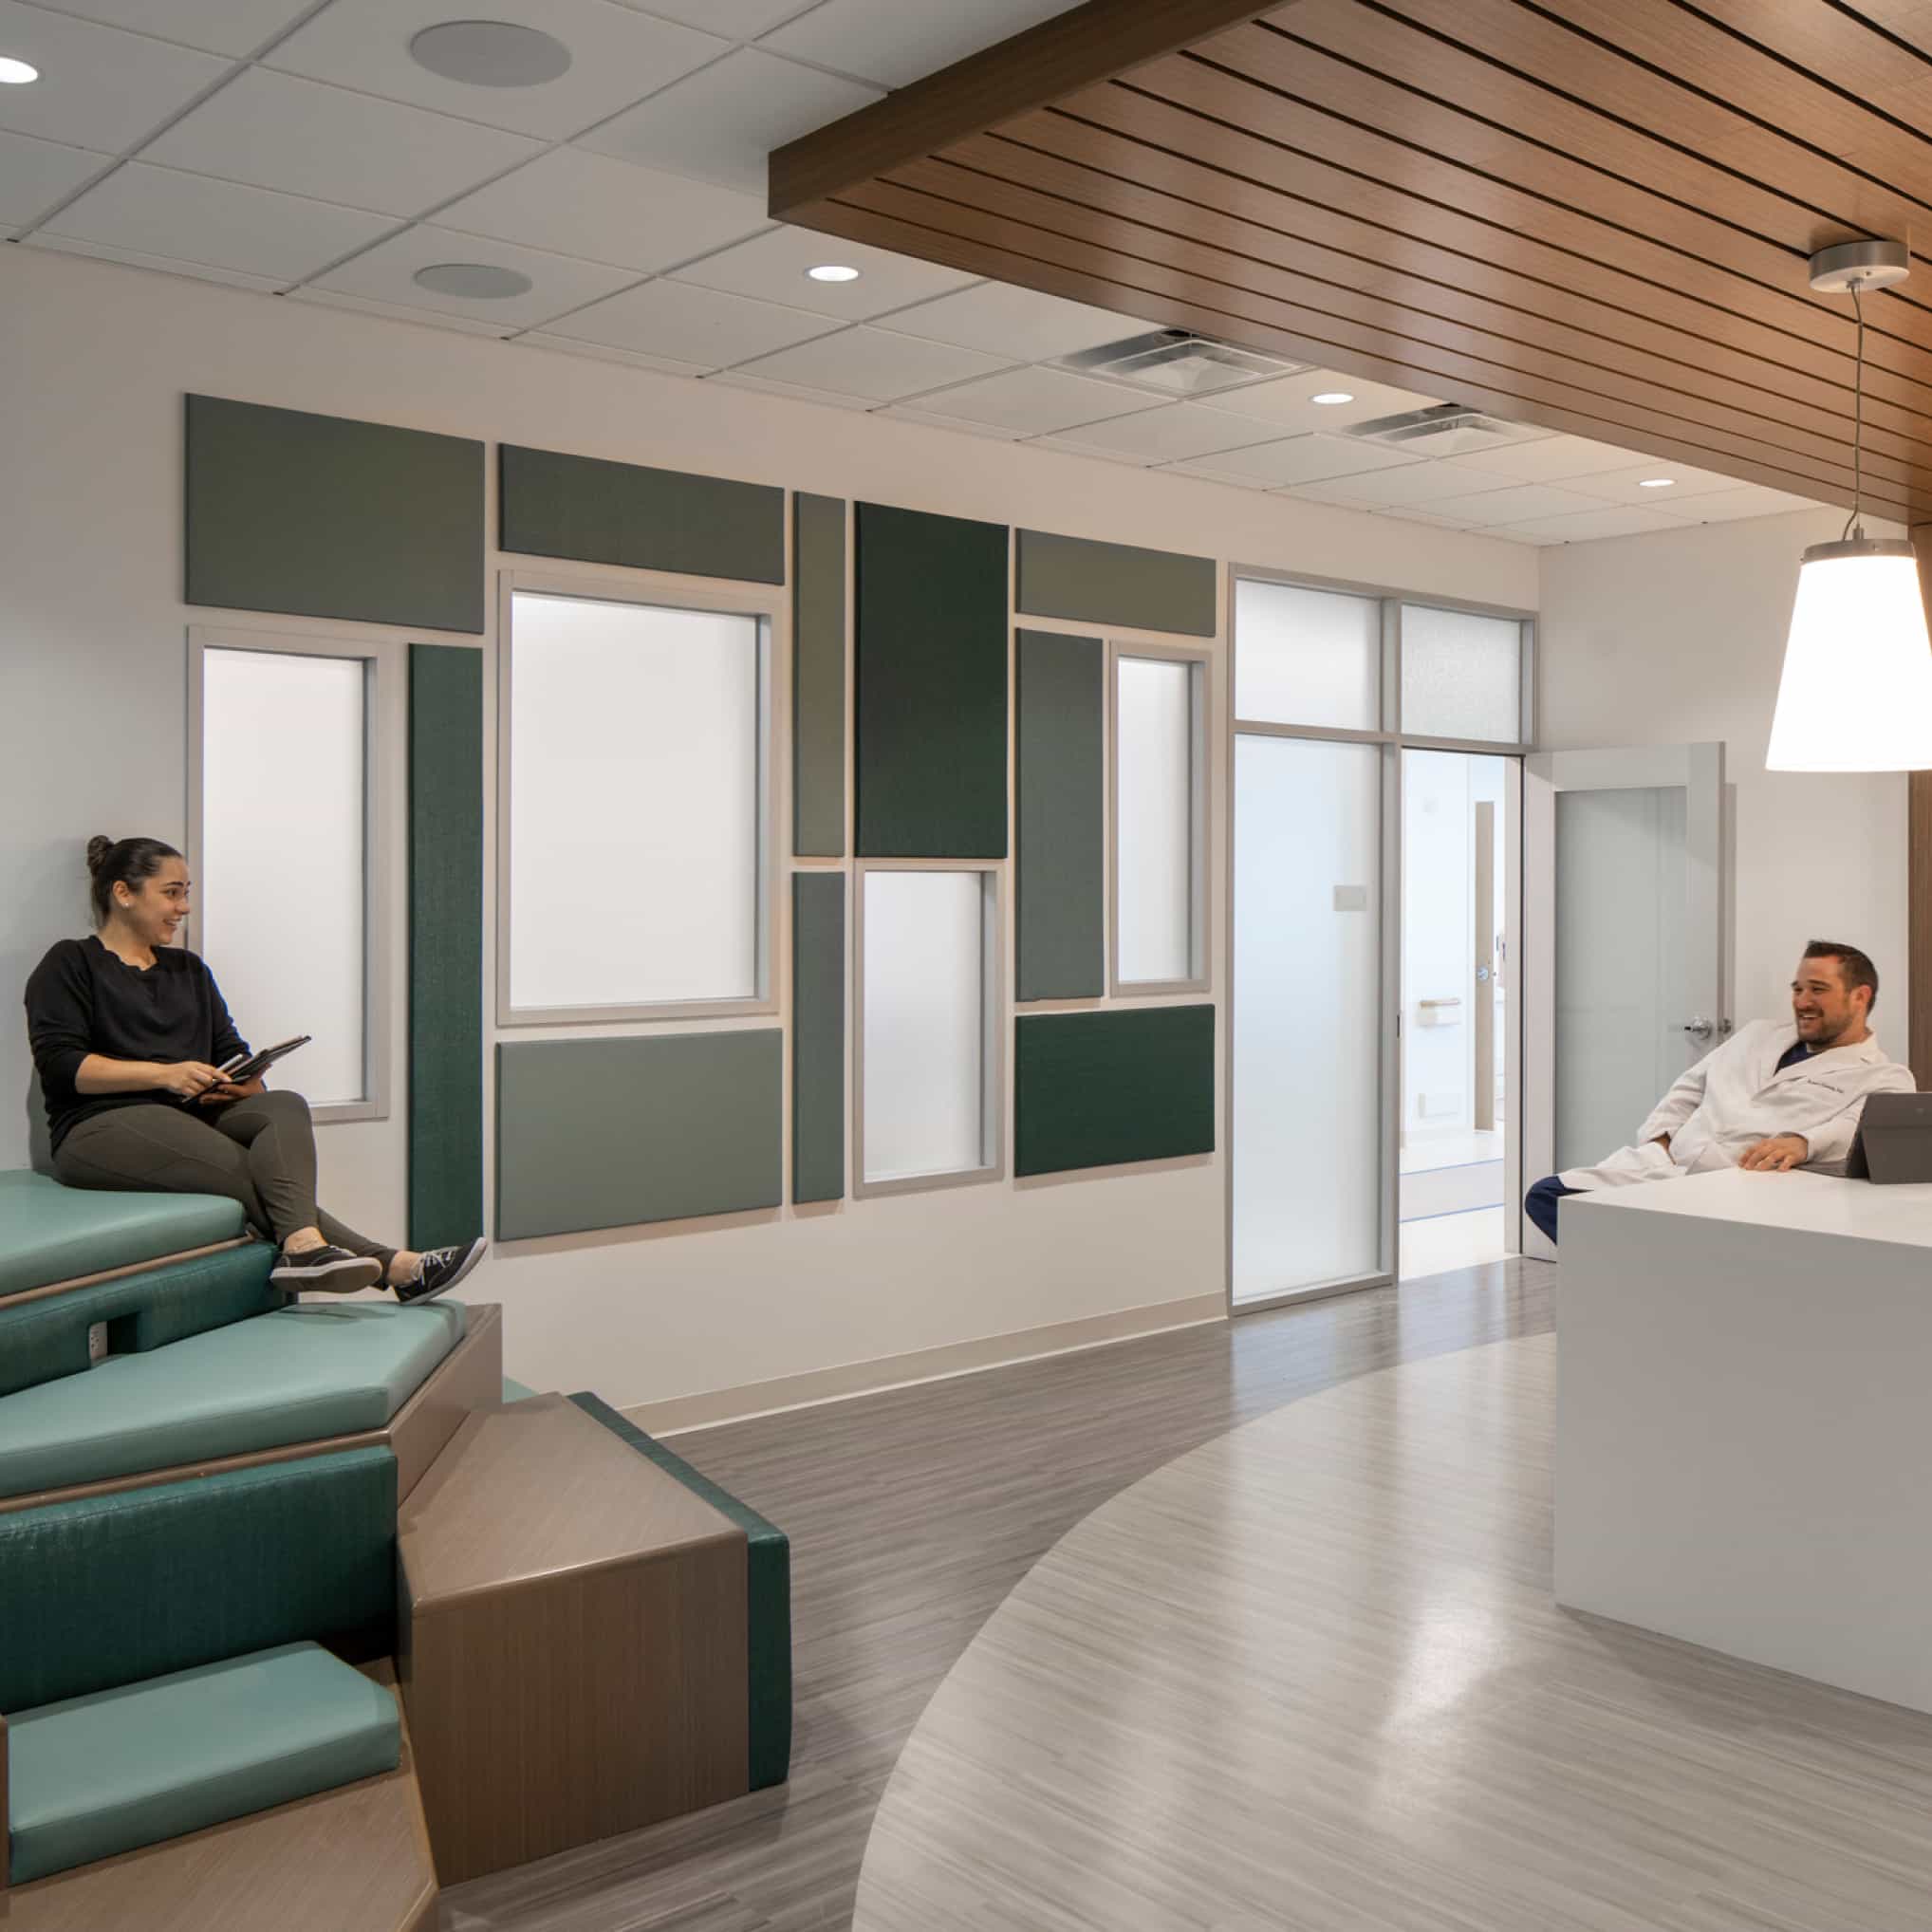 How Staff Respite Space Can Help Address the Health Care Staffing Crisis